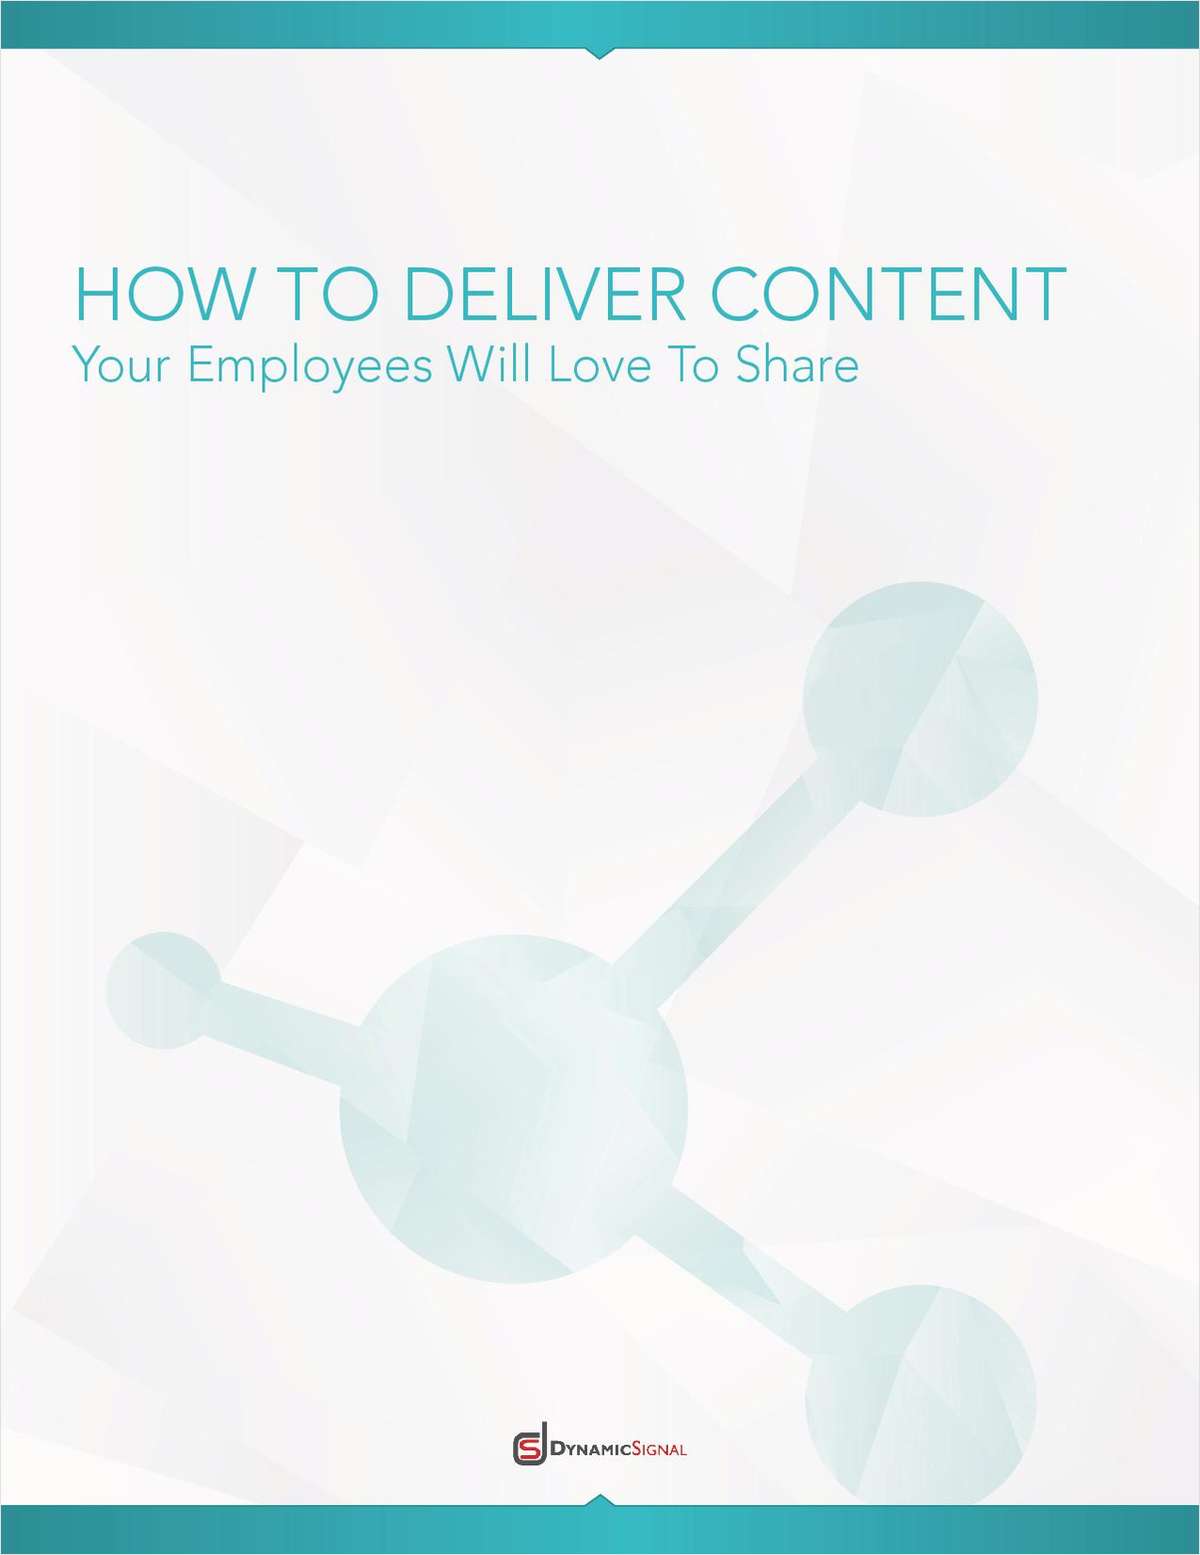 Learn How to Deliver Content Your Employees Love to Share